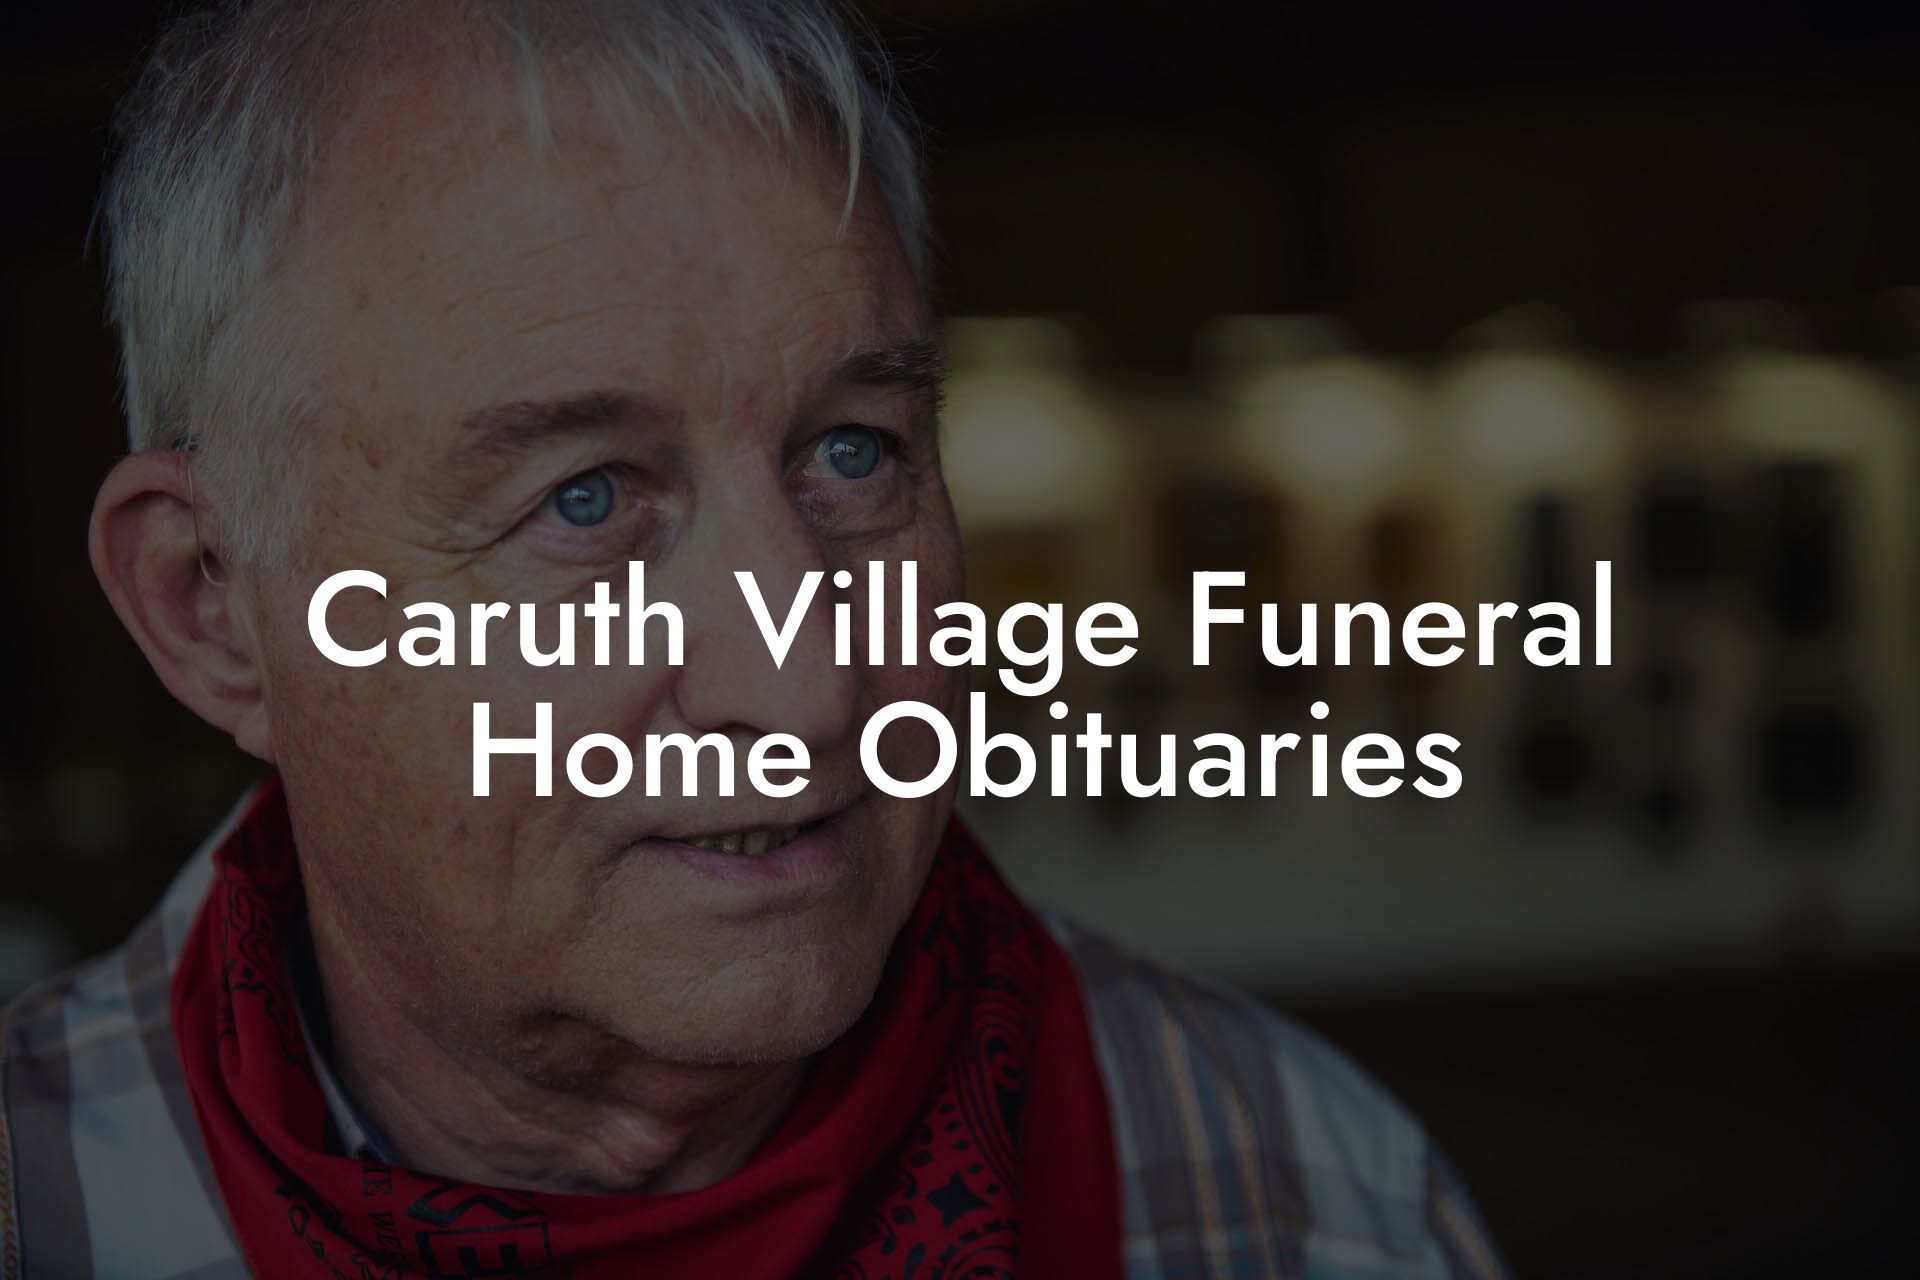 Caruth Village Funeral Home Obituaries